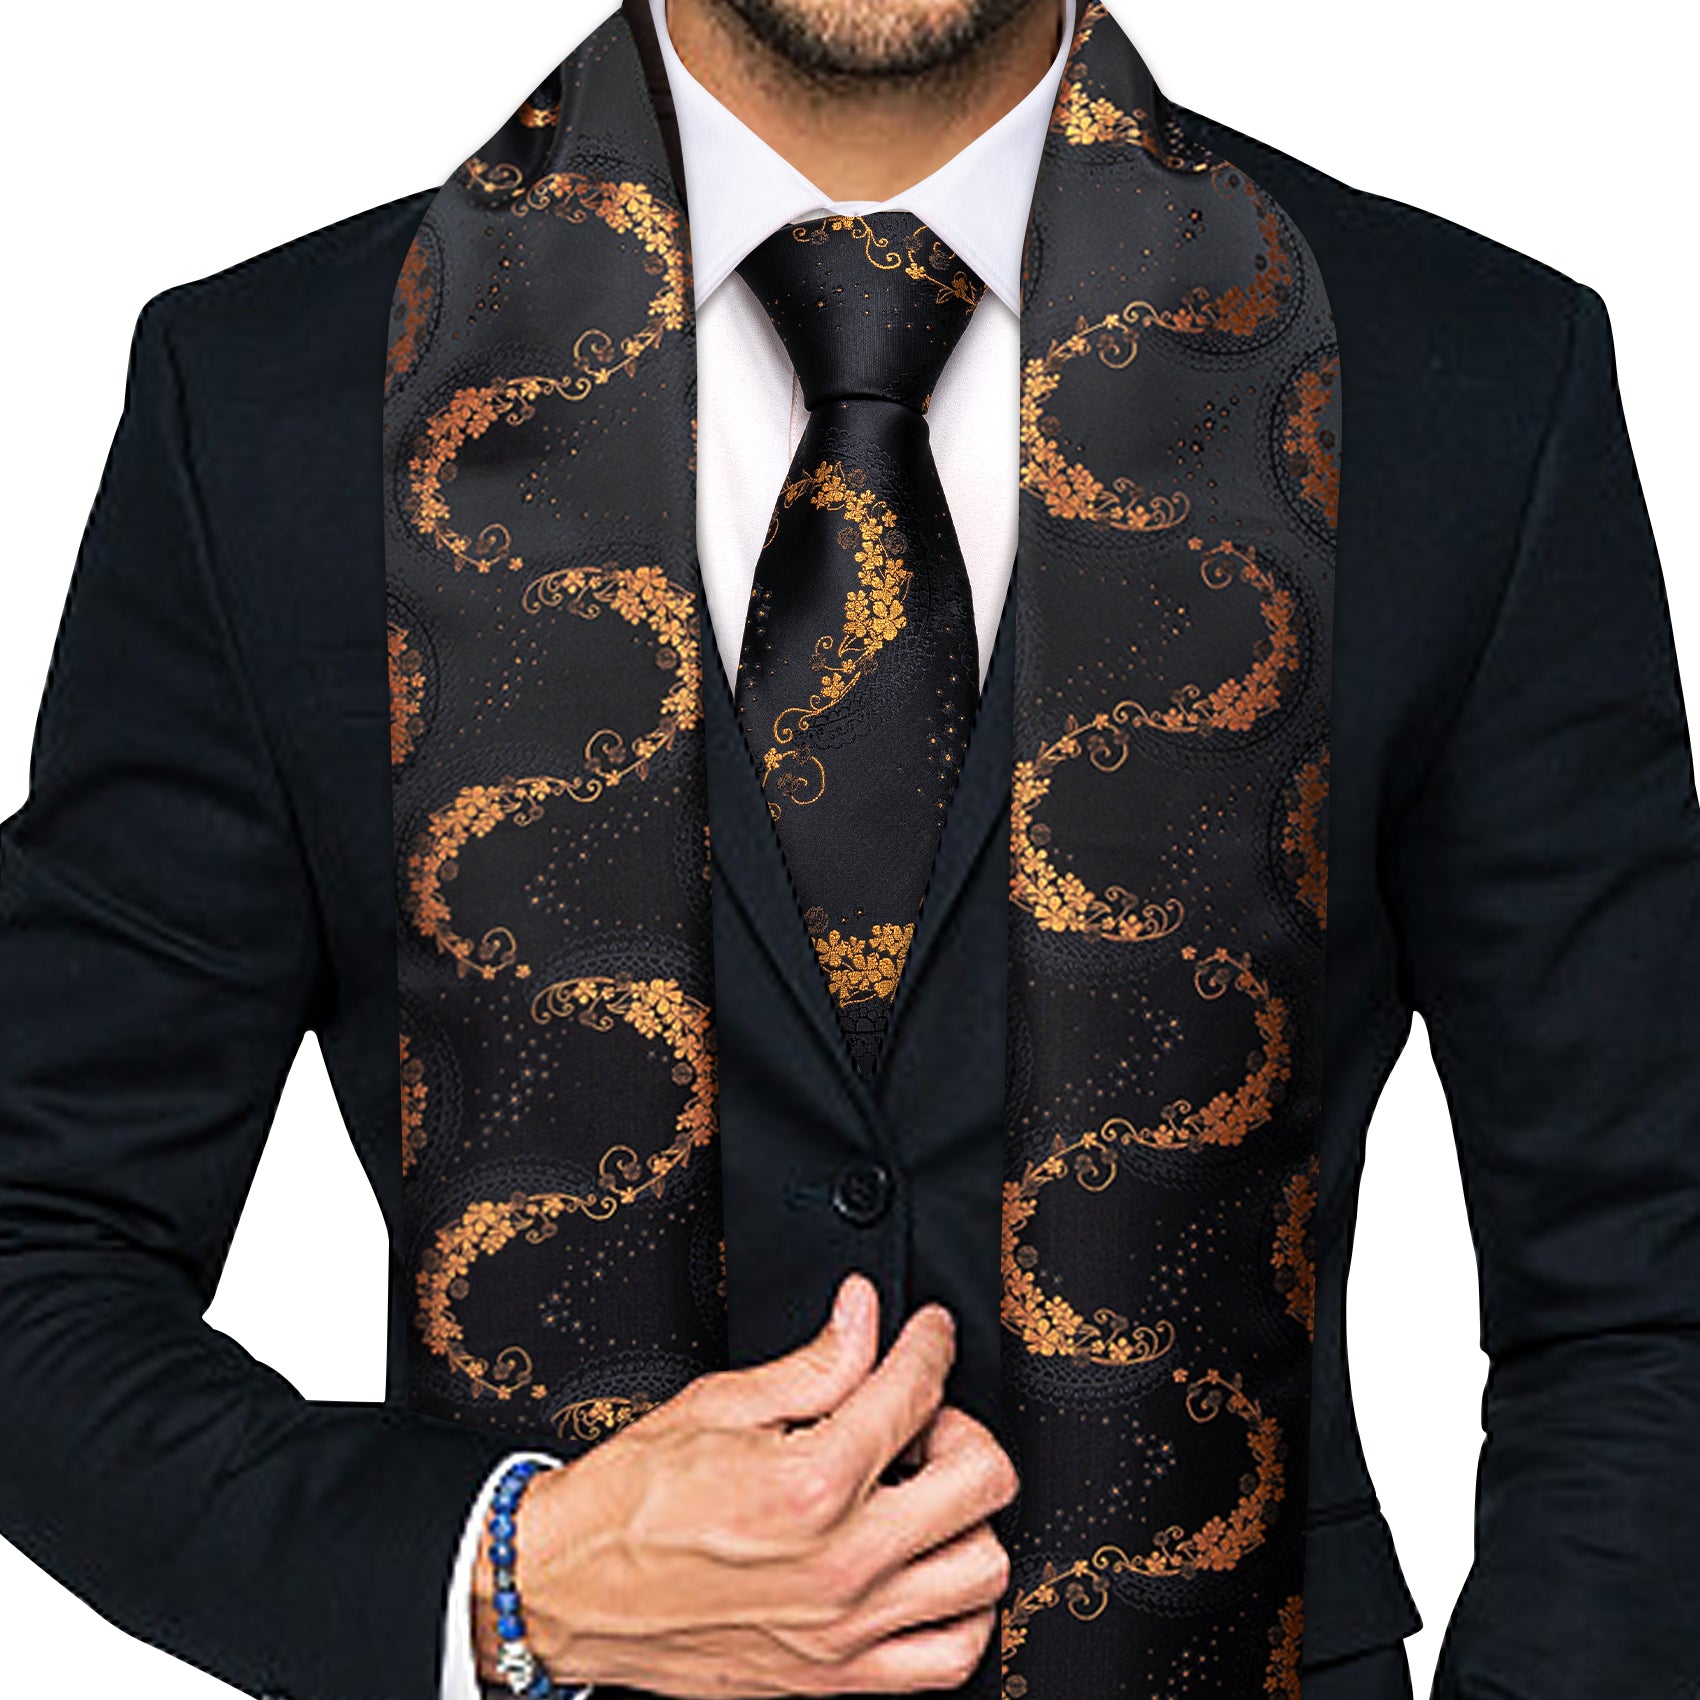 Luxury Black Gold Floral Scarf with Tie Set